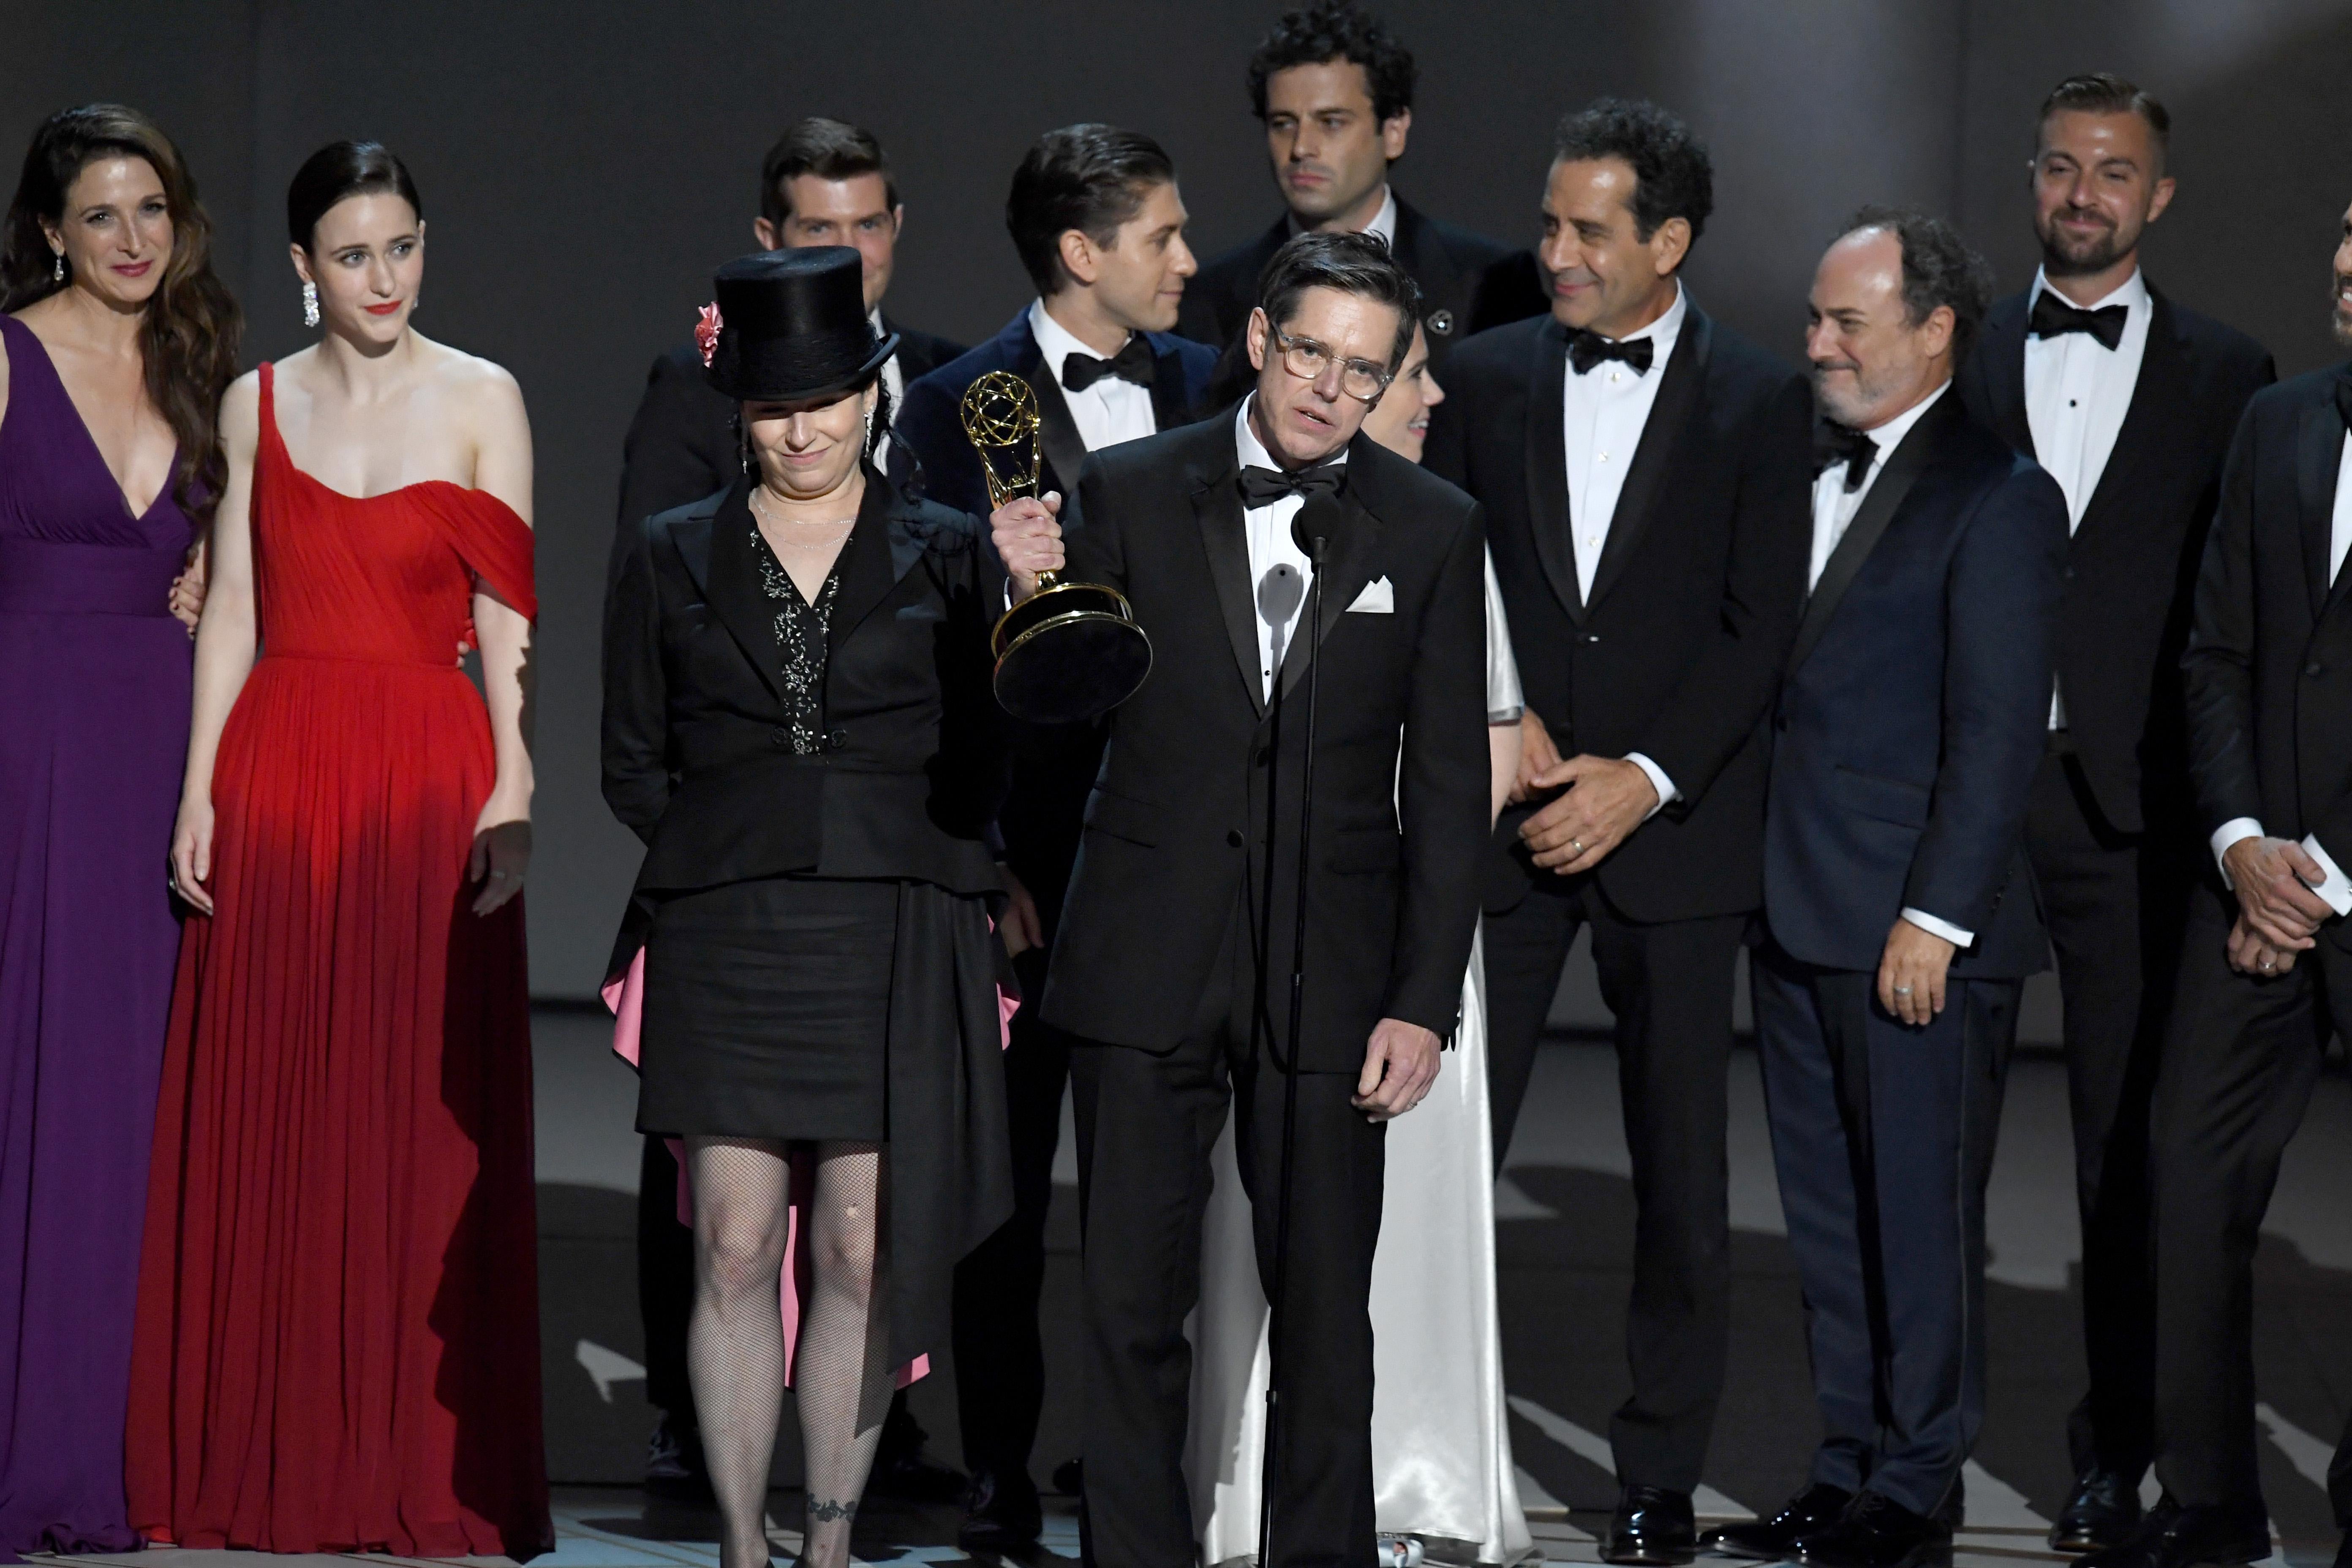 Amy Sherman-Palladino and Daniel Palladino and cast and crew accept the award onstage.